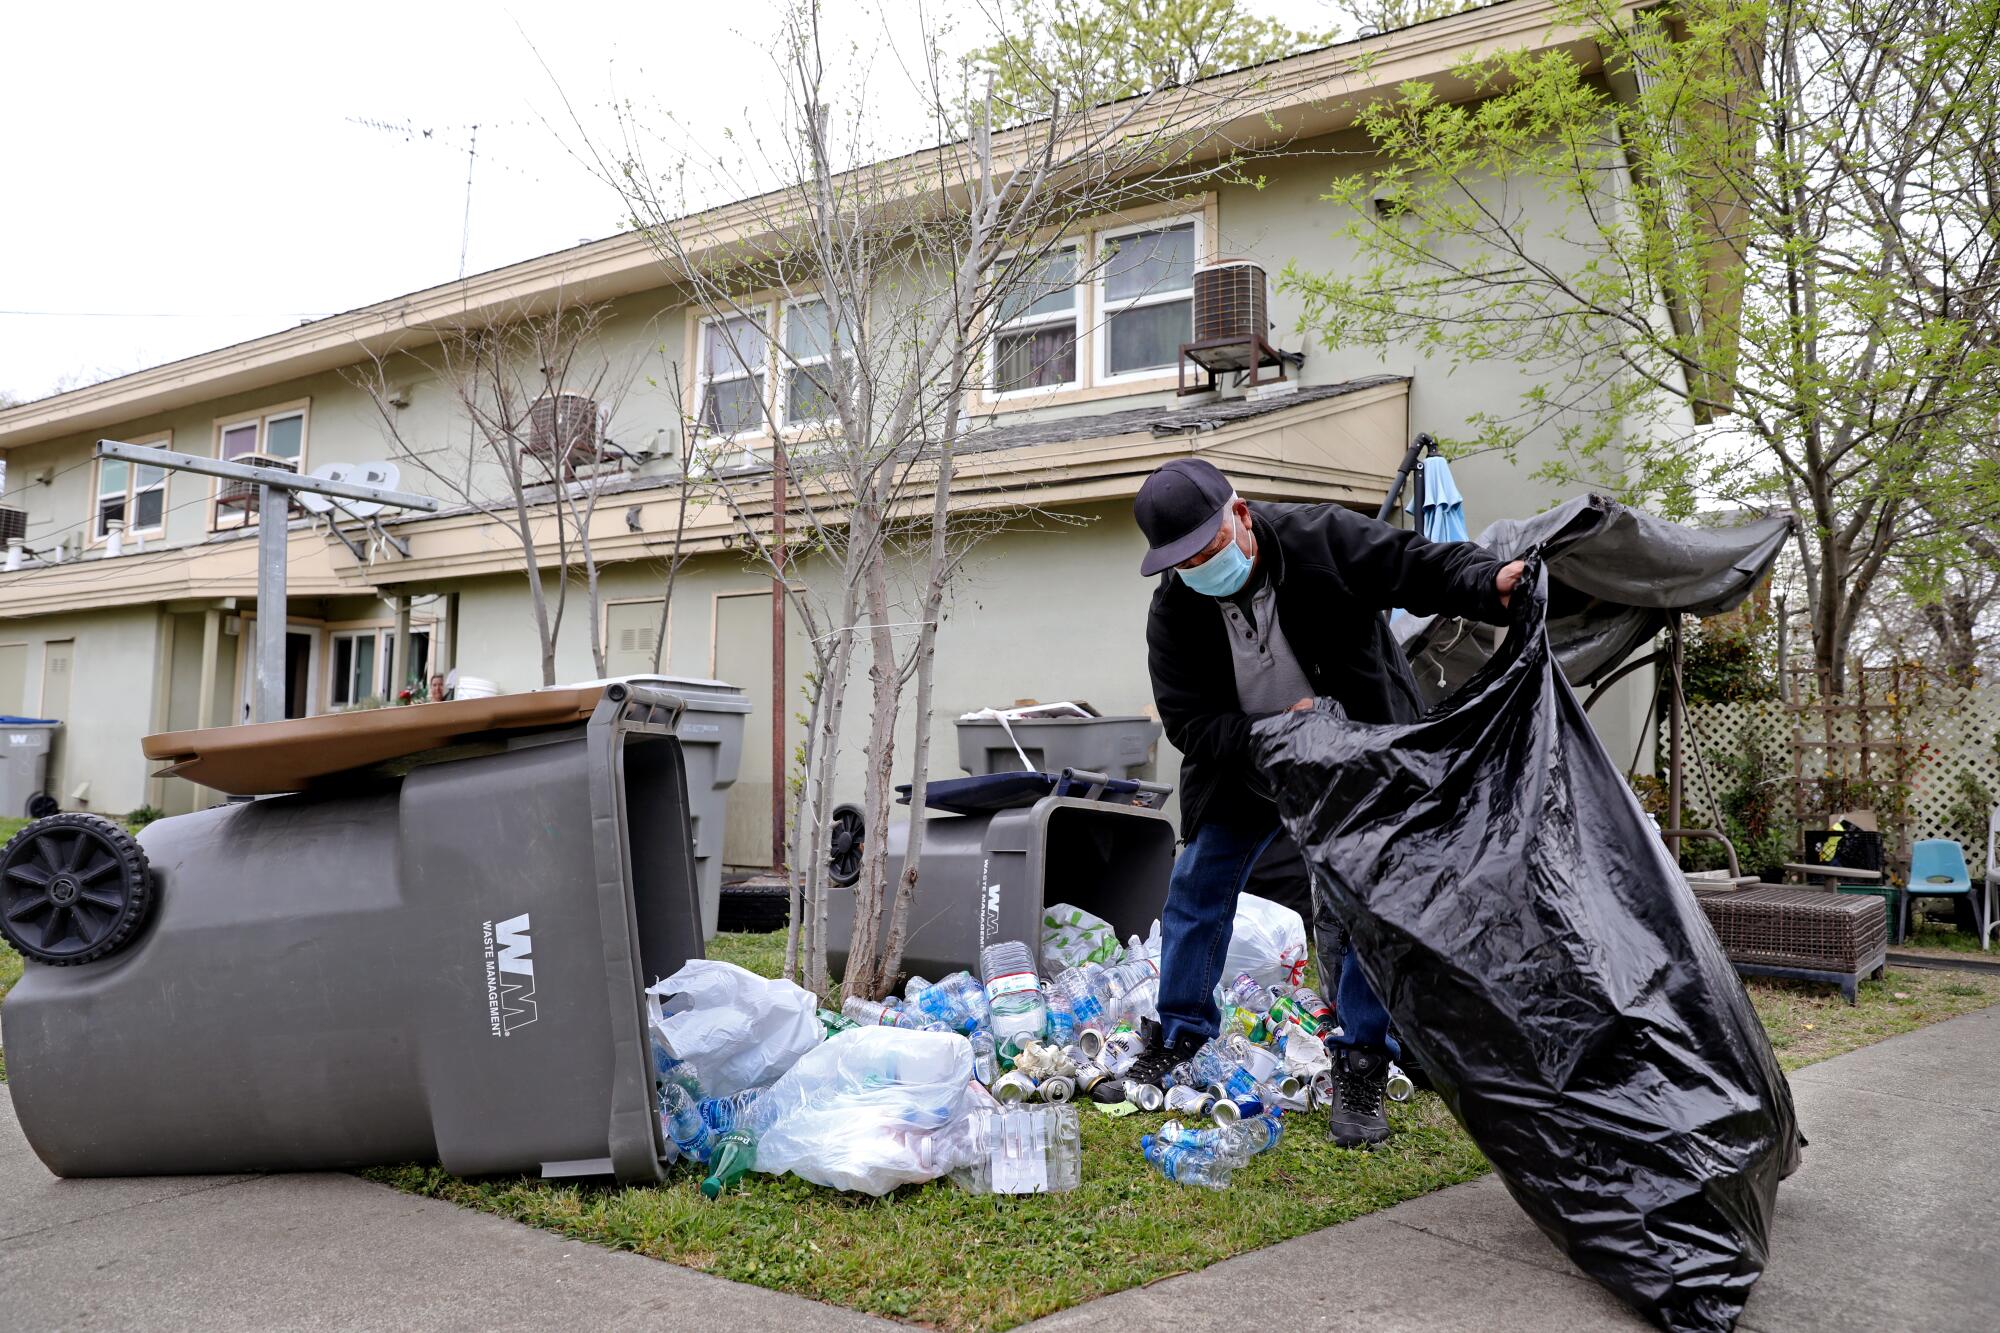 A man gathers recyclables from an overturned trash bin 